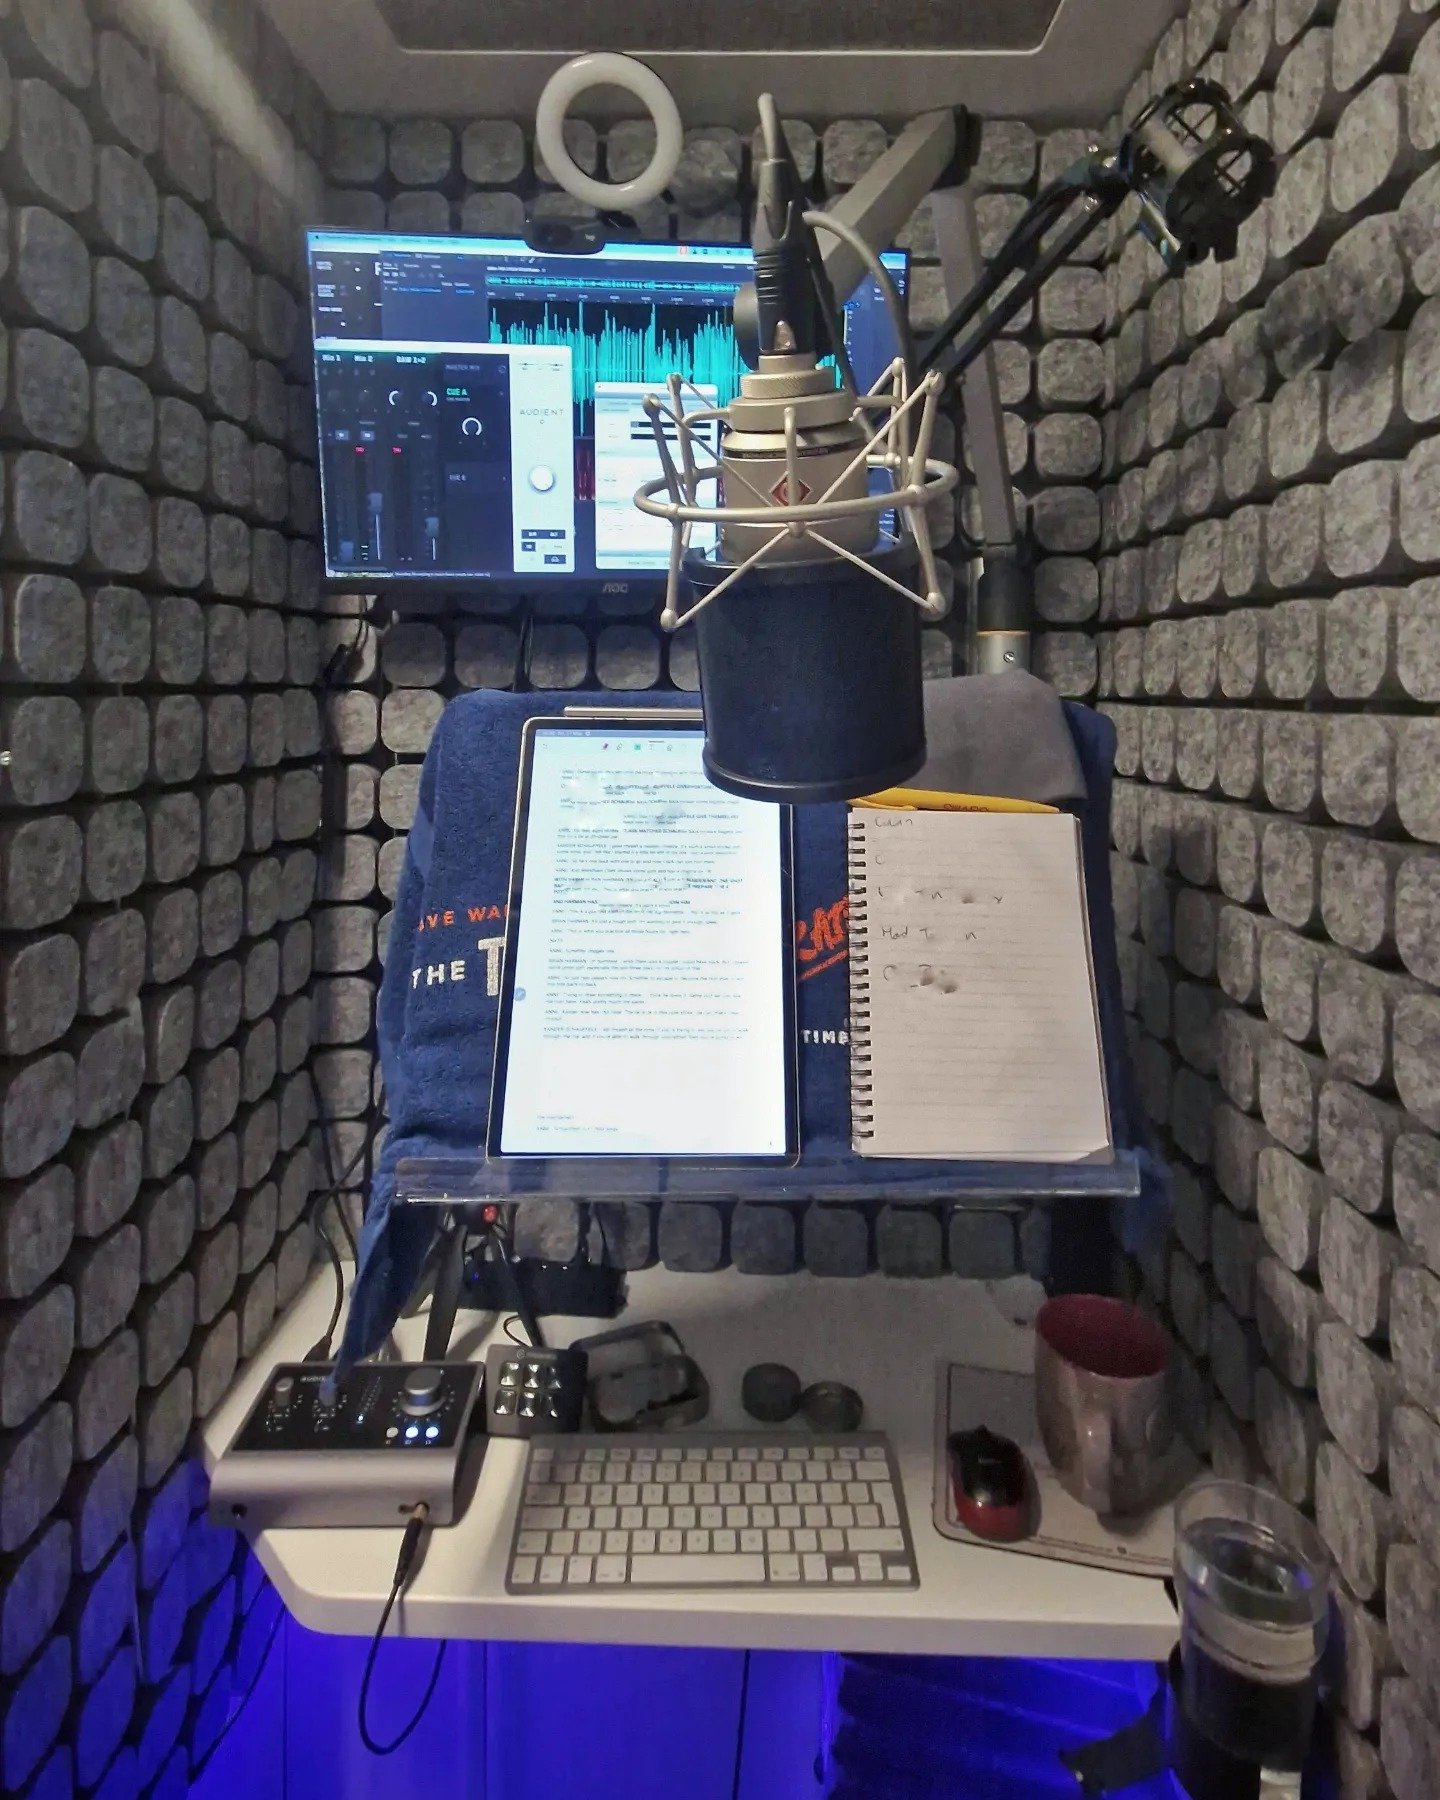 And that's a wrap!

Just finished a challenging but super fun 2-hour session to cap off a long week. Hope you've all had a great week, and sending best wishes to all my VO friends at the One Voice Awards tomorrow 🏆

Enjoy your weekend, everyone! 😊